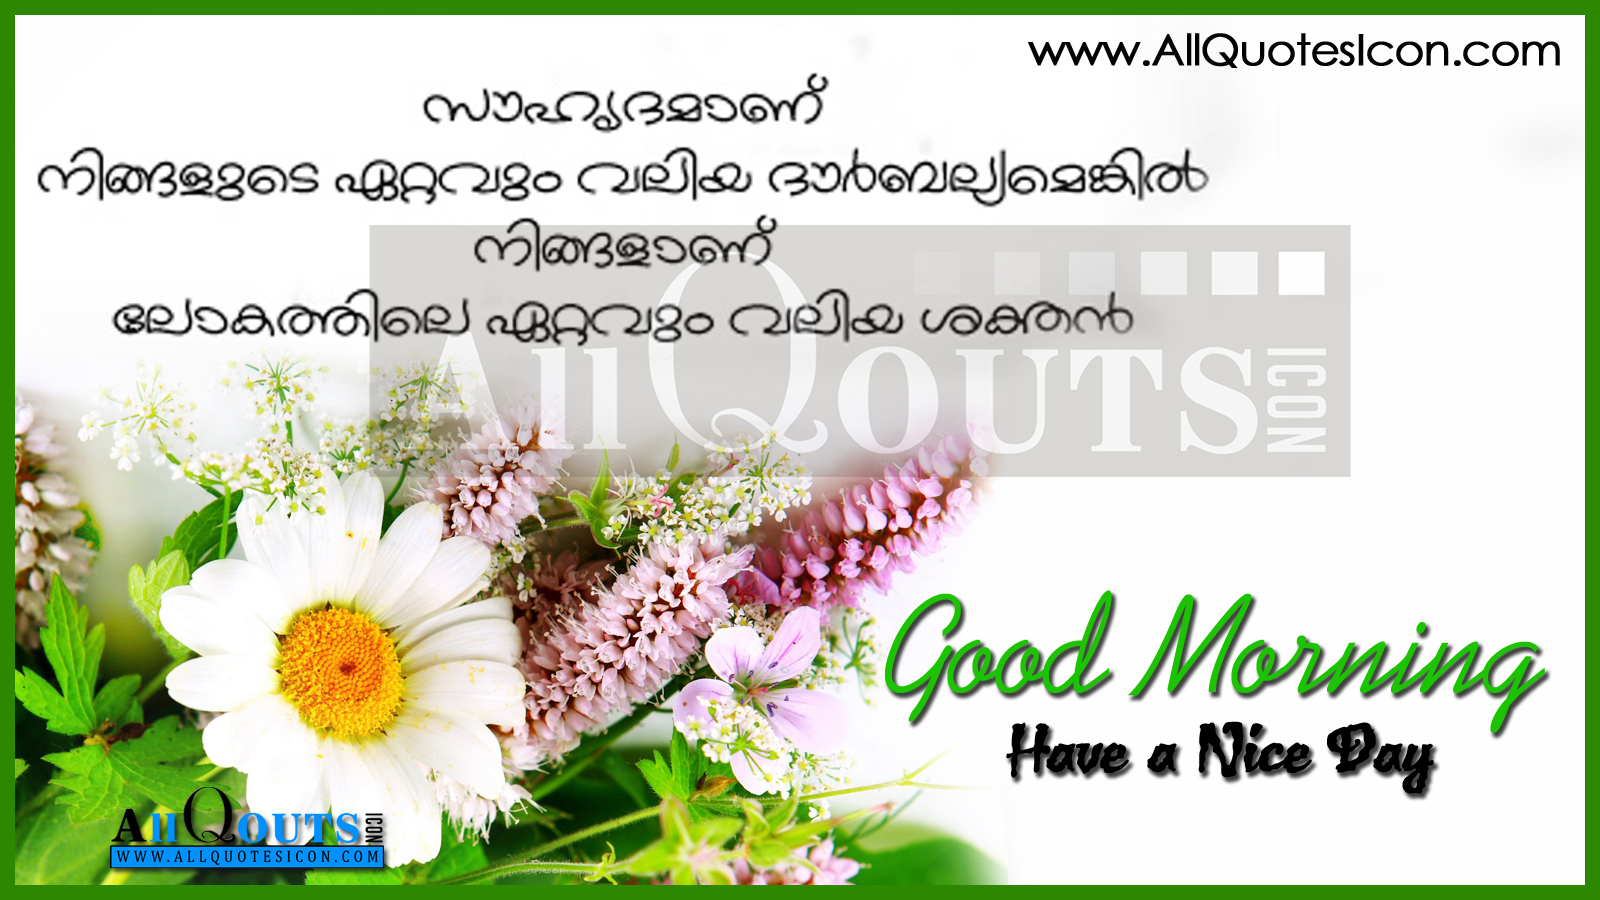 Good Morning Quotes In Malayalam Archidev - Good Morning Thoughts In Malayalam , HD Wallpaper & Backgrounds